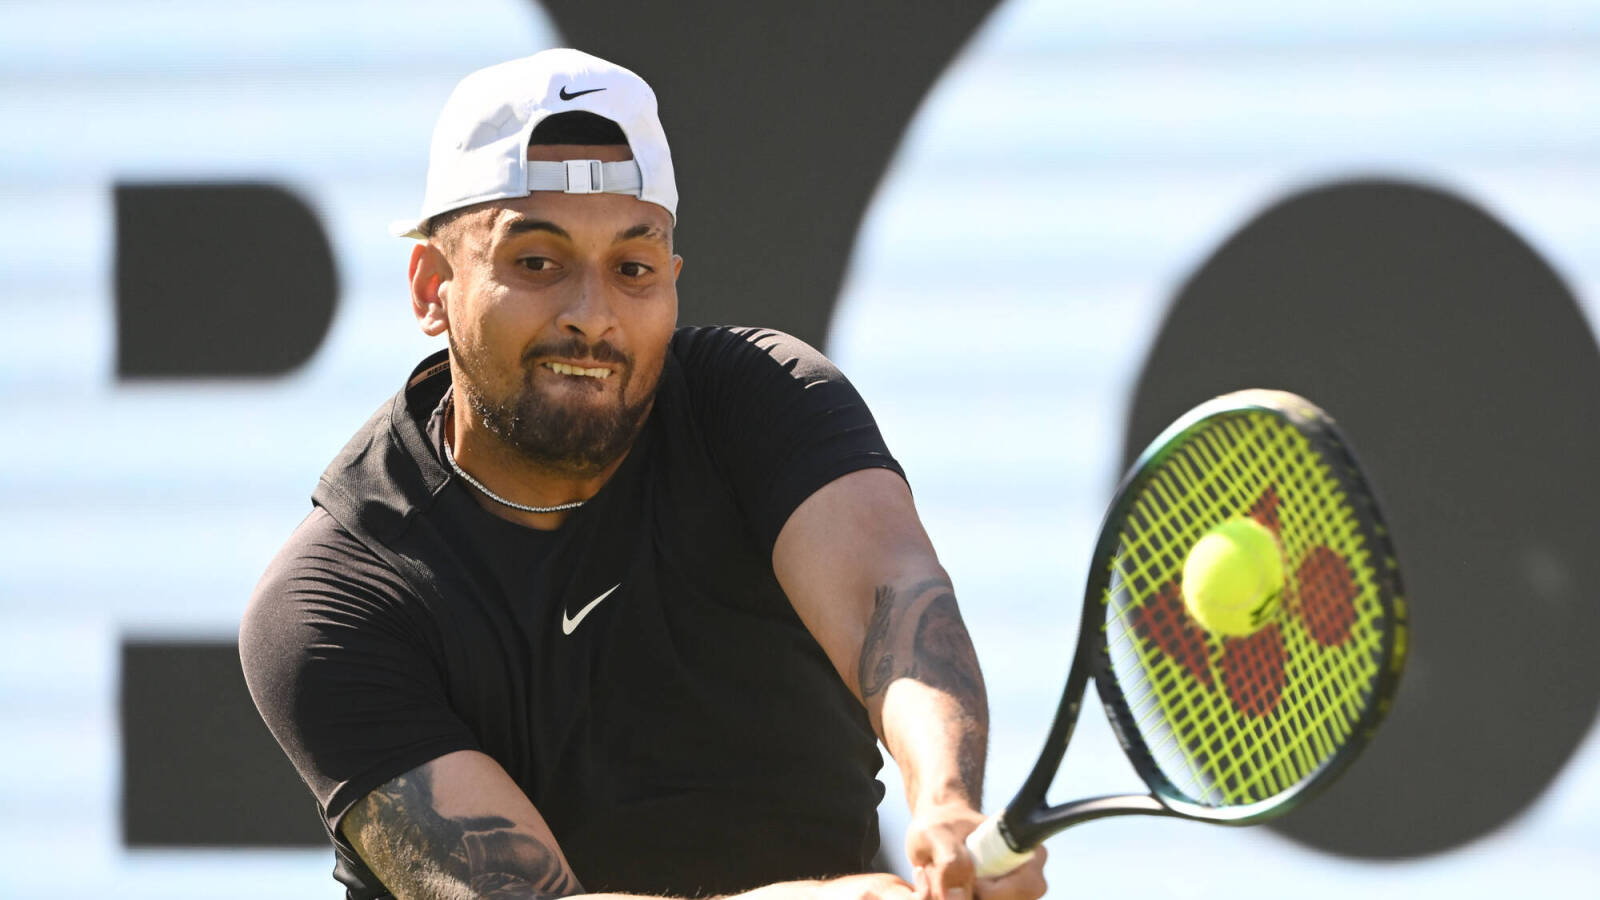 'I’ll teach you tennis,' Nick Kyrgios takes on coaching responsibilities amidst his busy schedule at the Australian Open, here’s all you need to know about it!